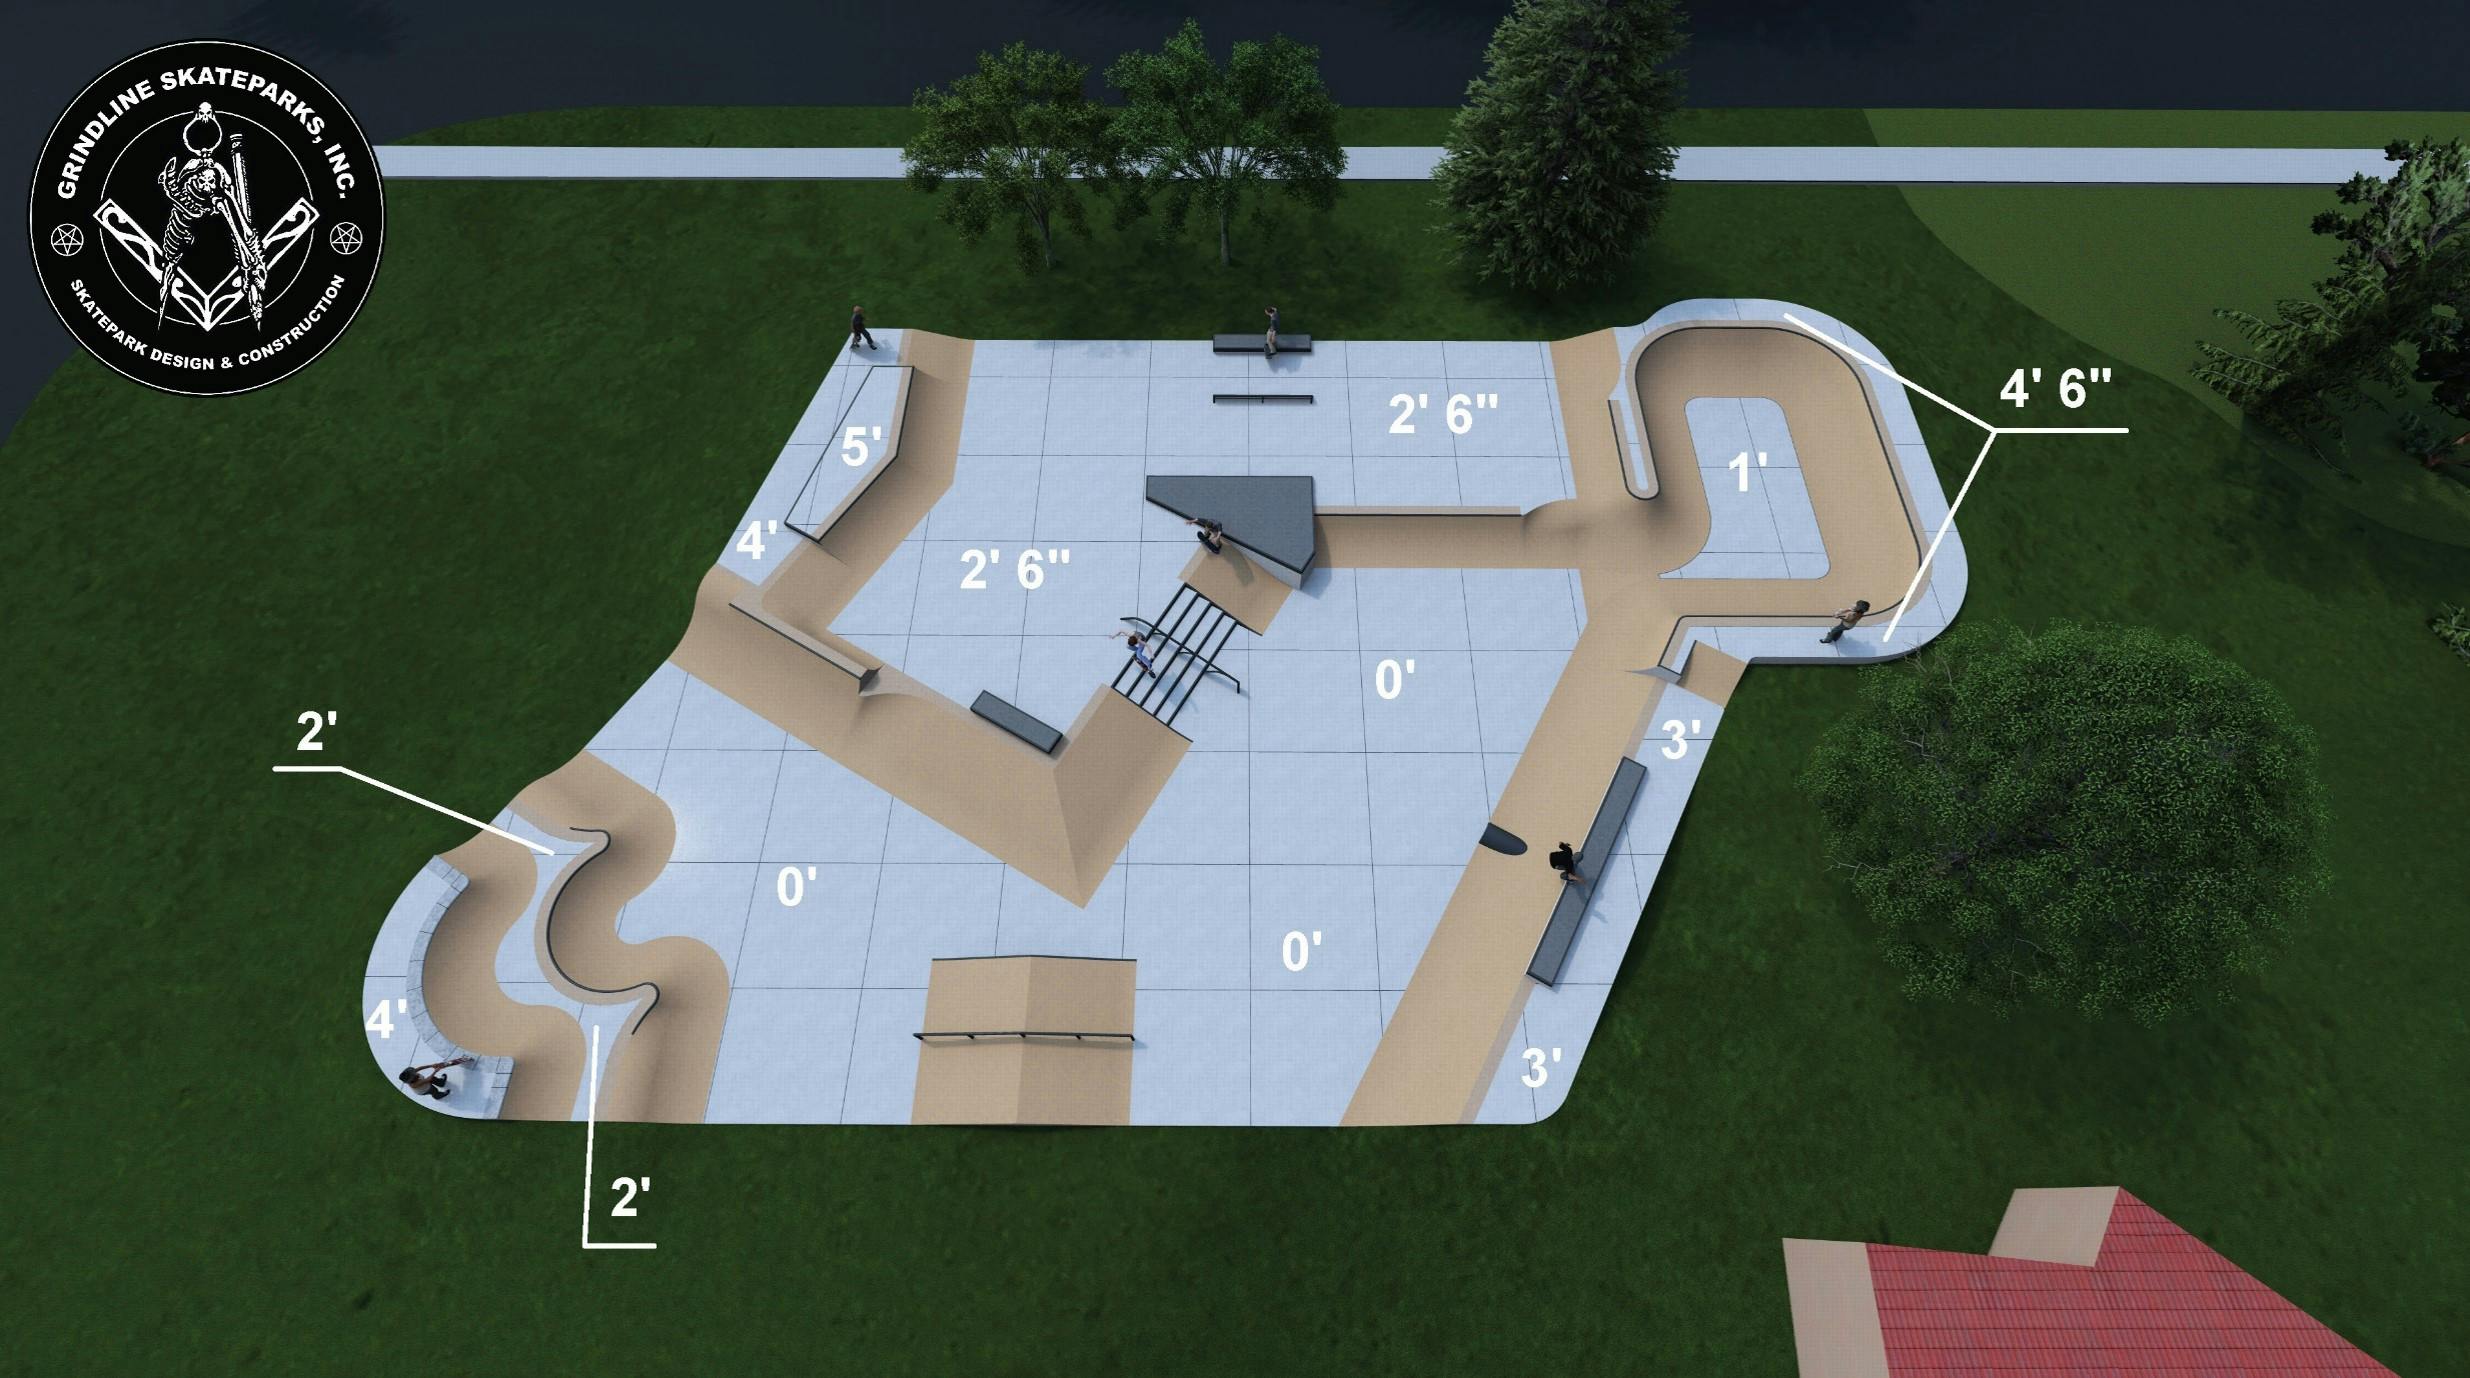 Lopez Skatepark concept drawing with elevations